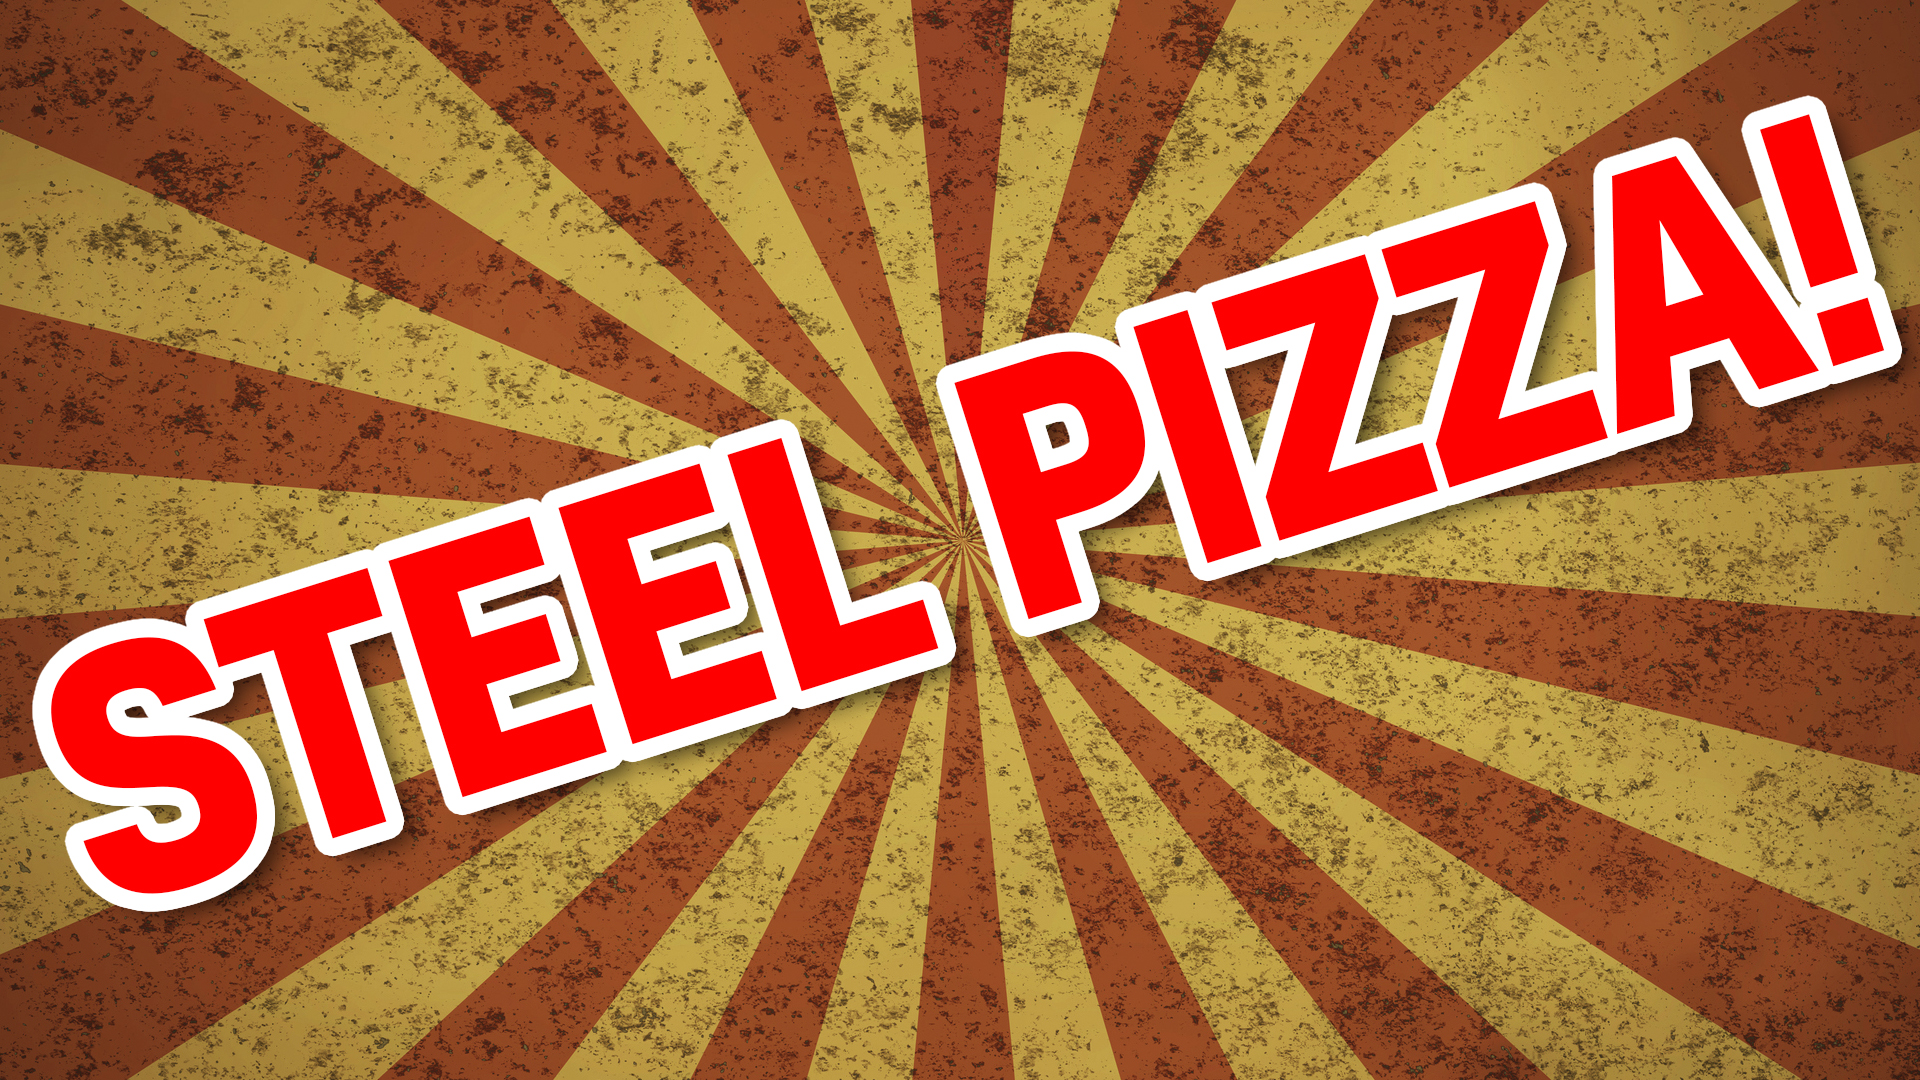 Your name is: STEEL PIZZA!